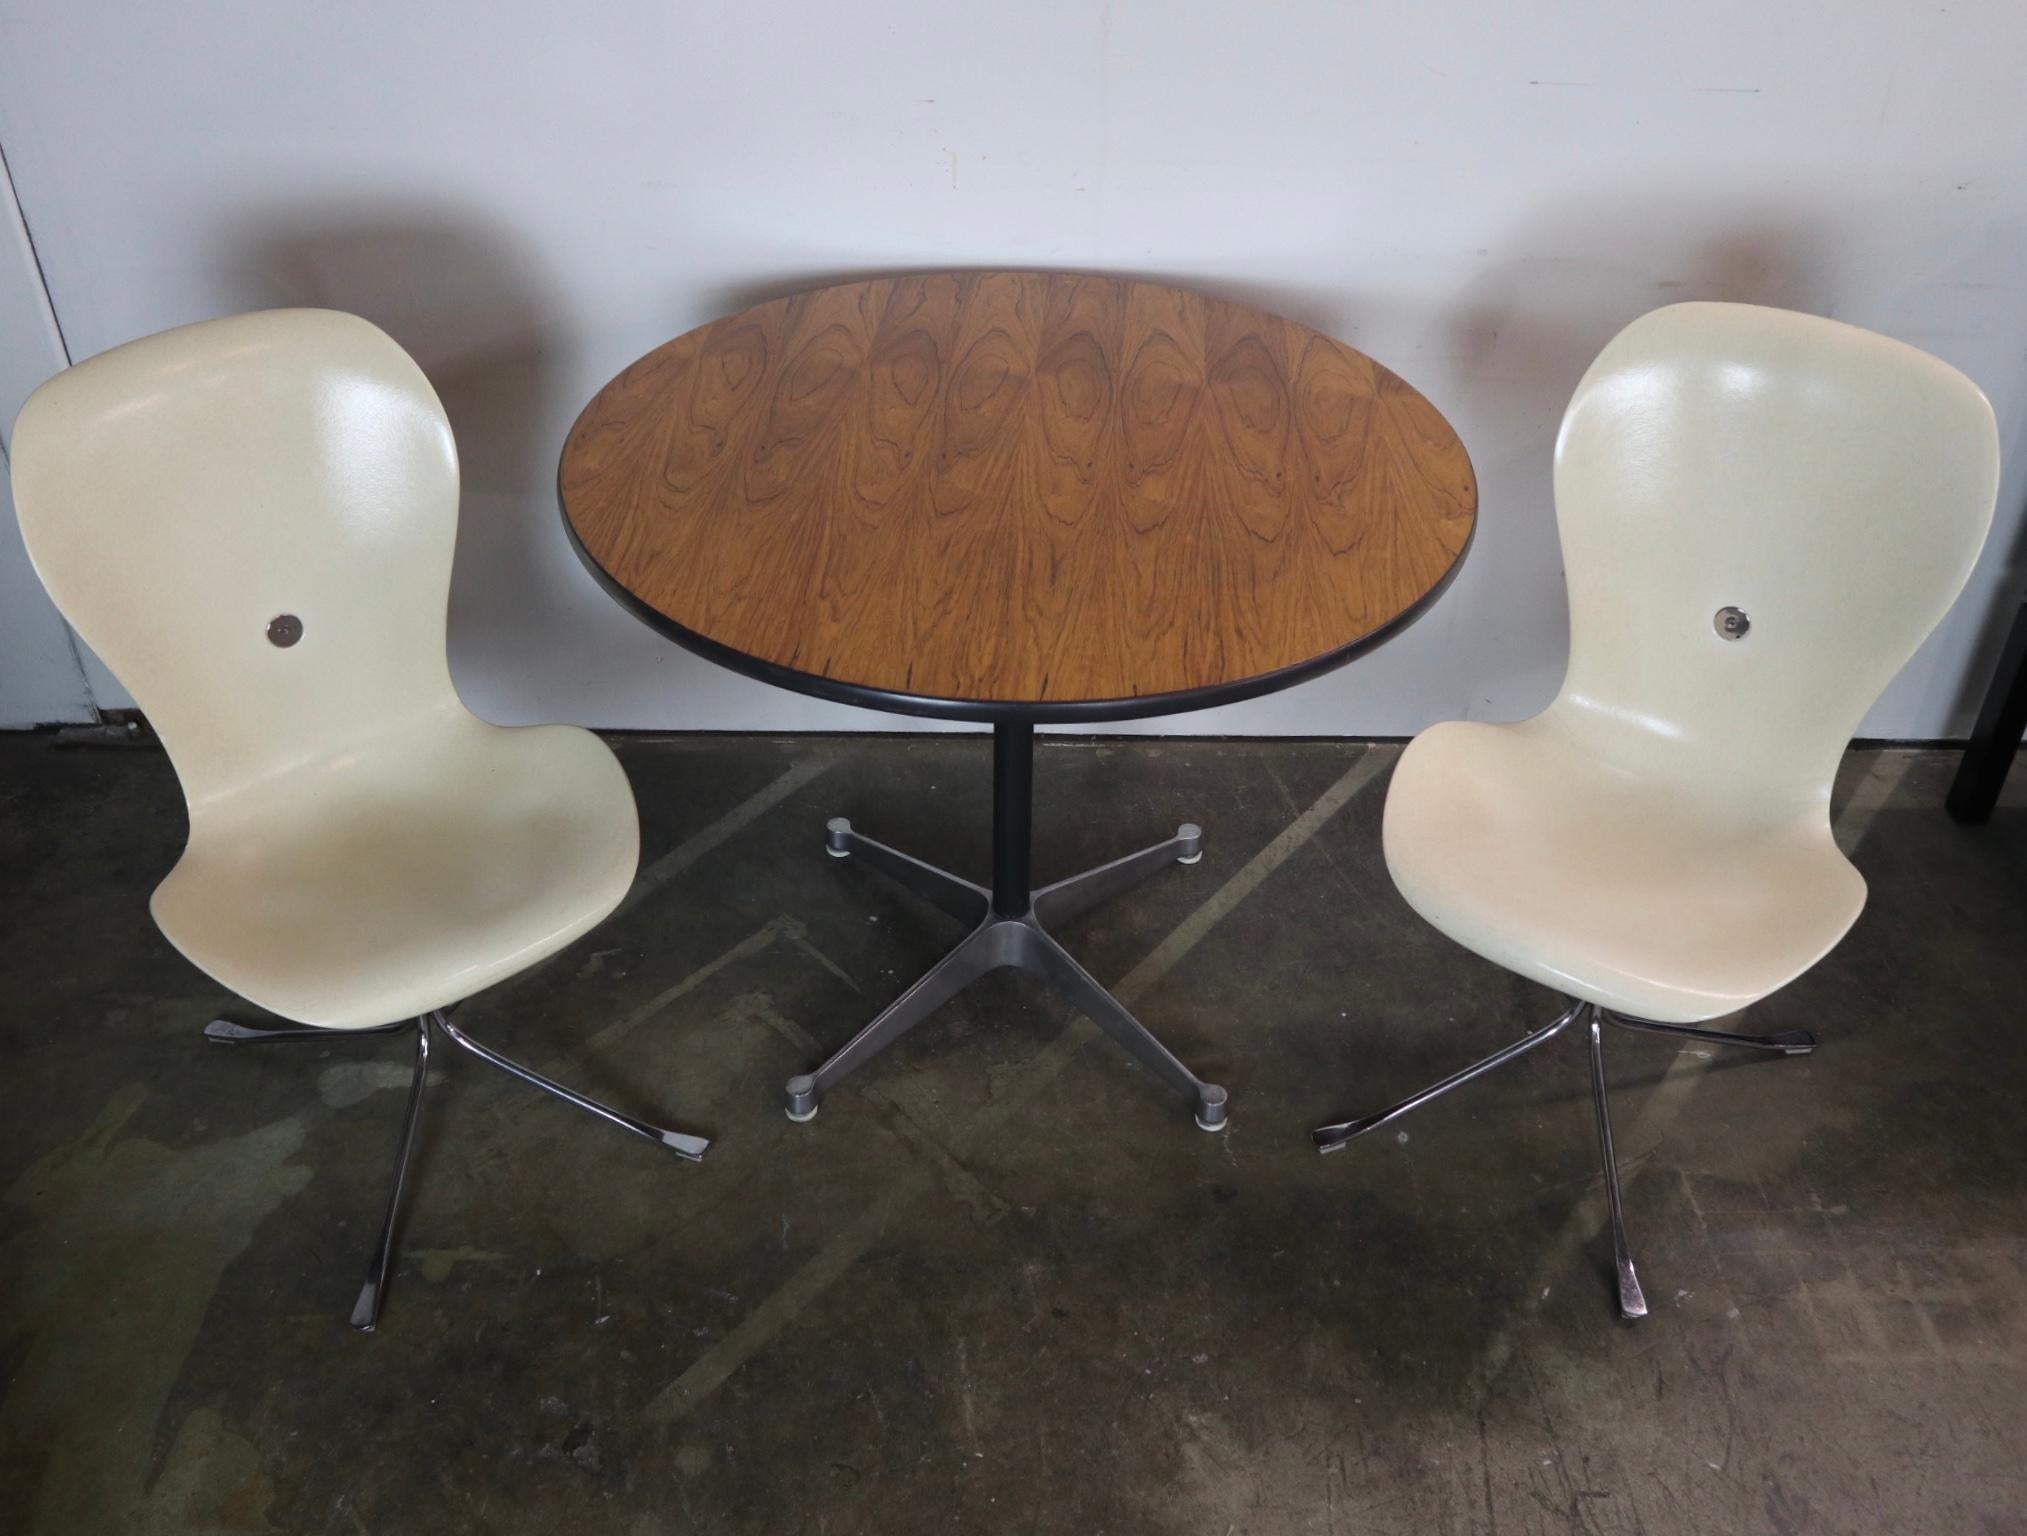 20th Century Unique Breakfast Cafe Style Dining Set Charles & Ray Eames and Gideon Kramer